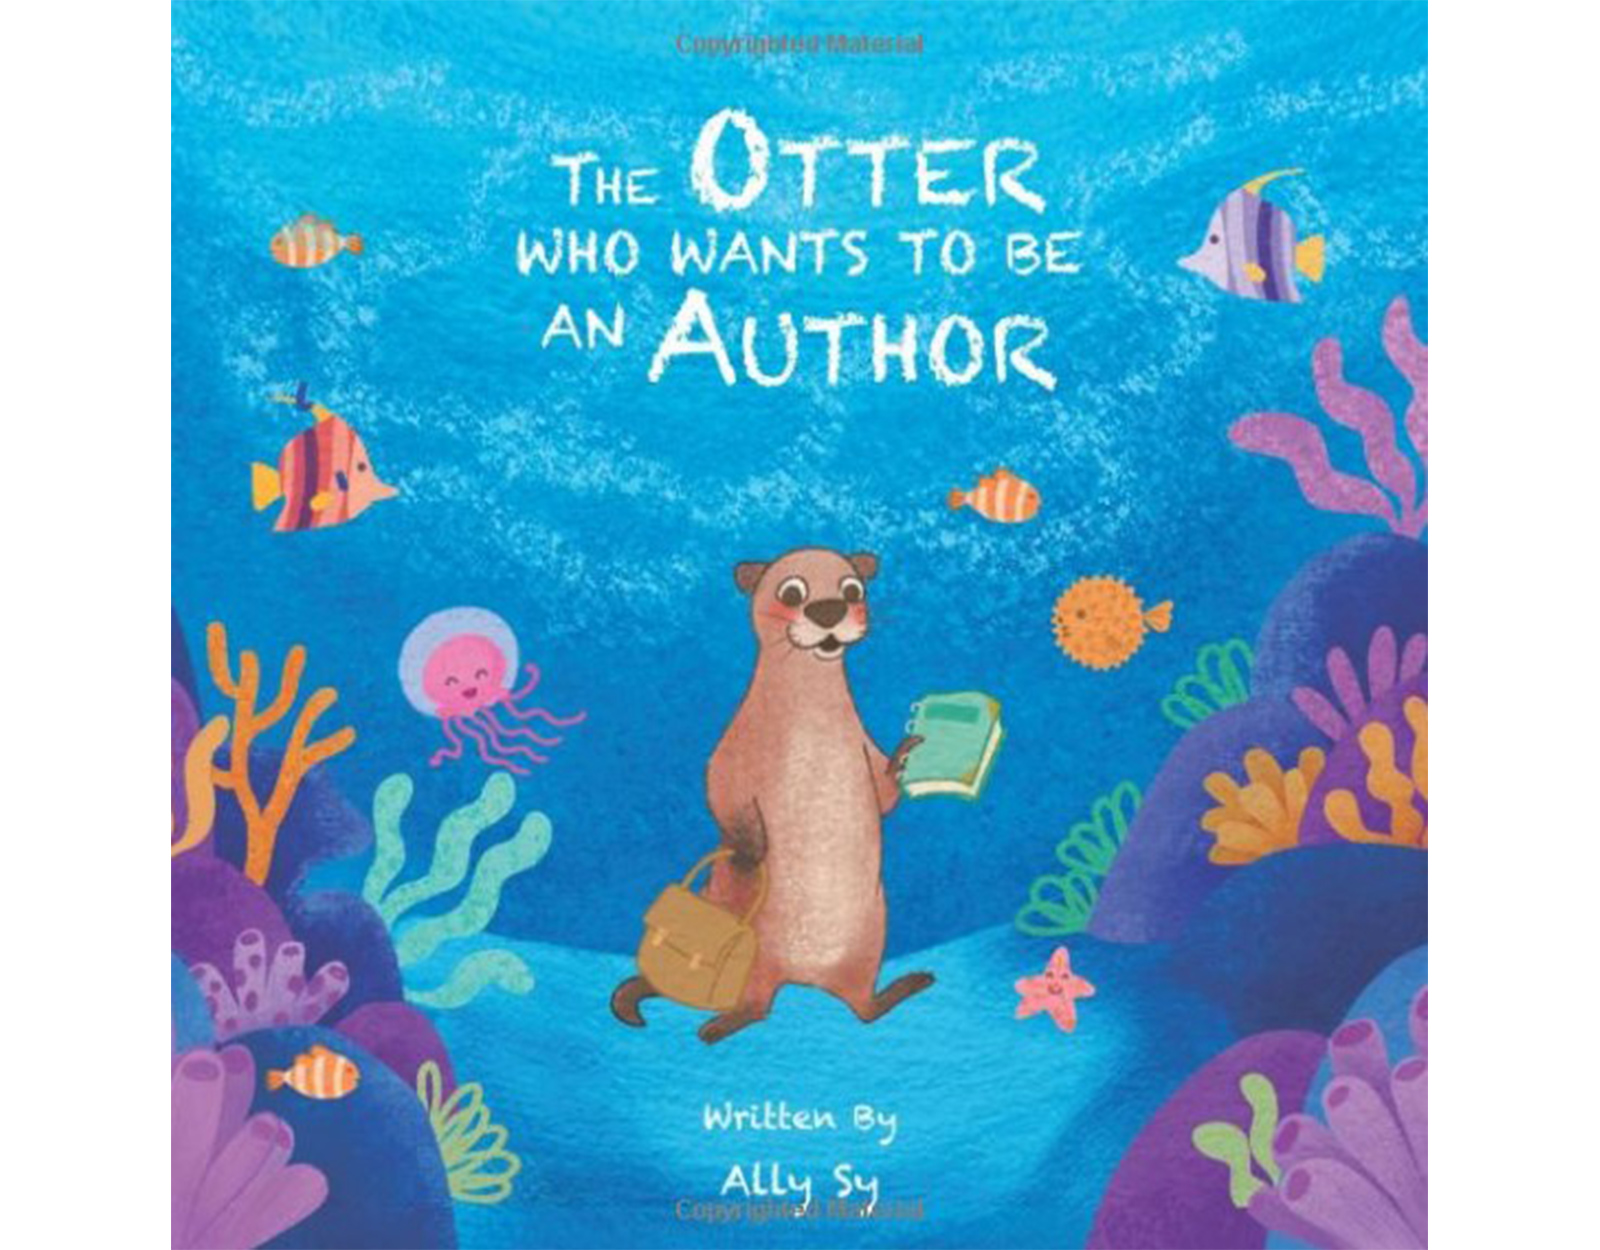 The Otter who wants to be an Author